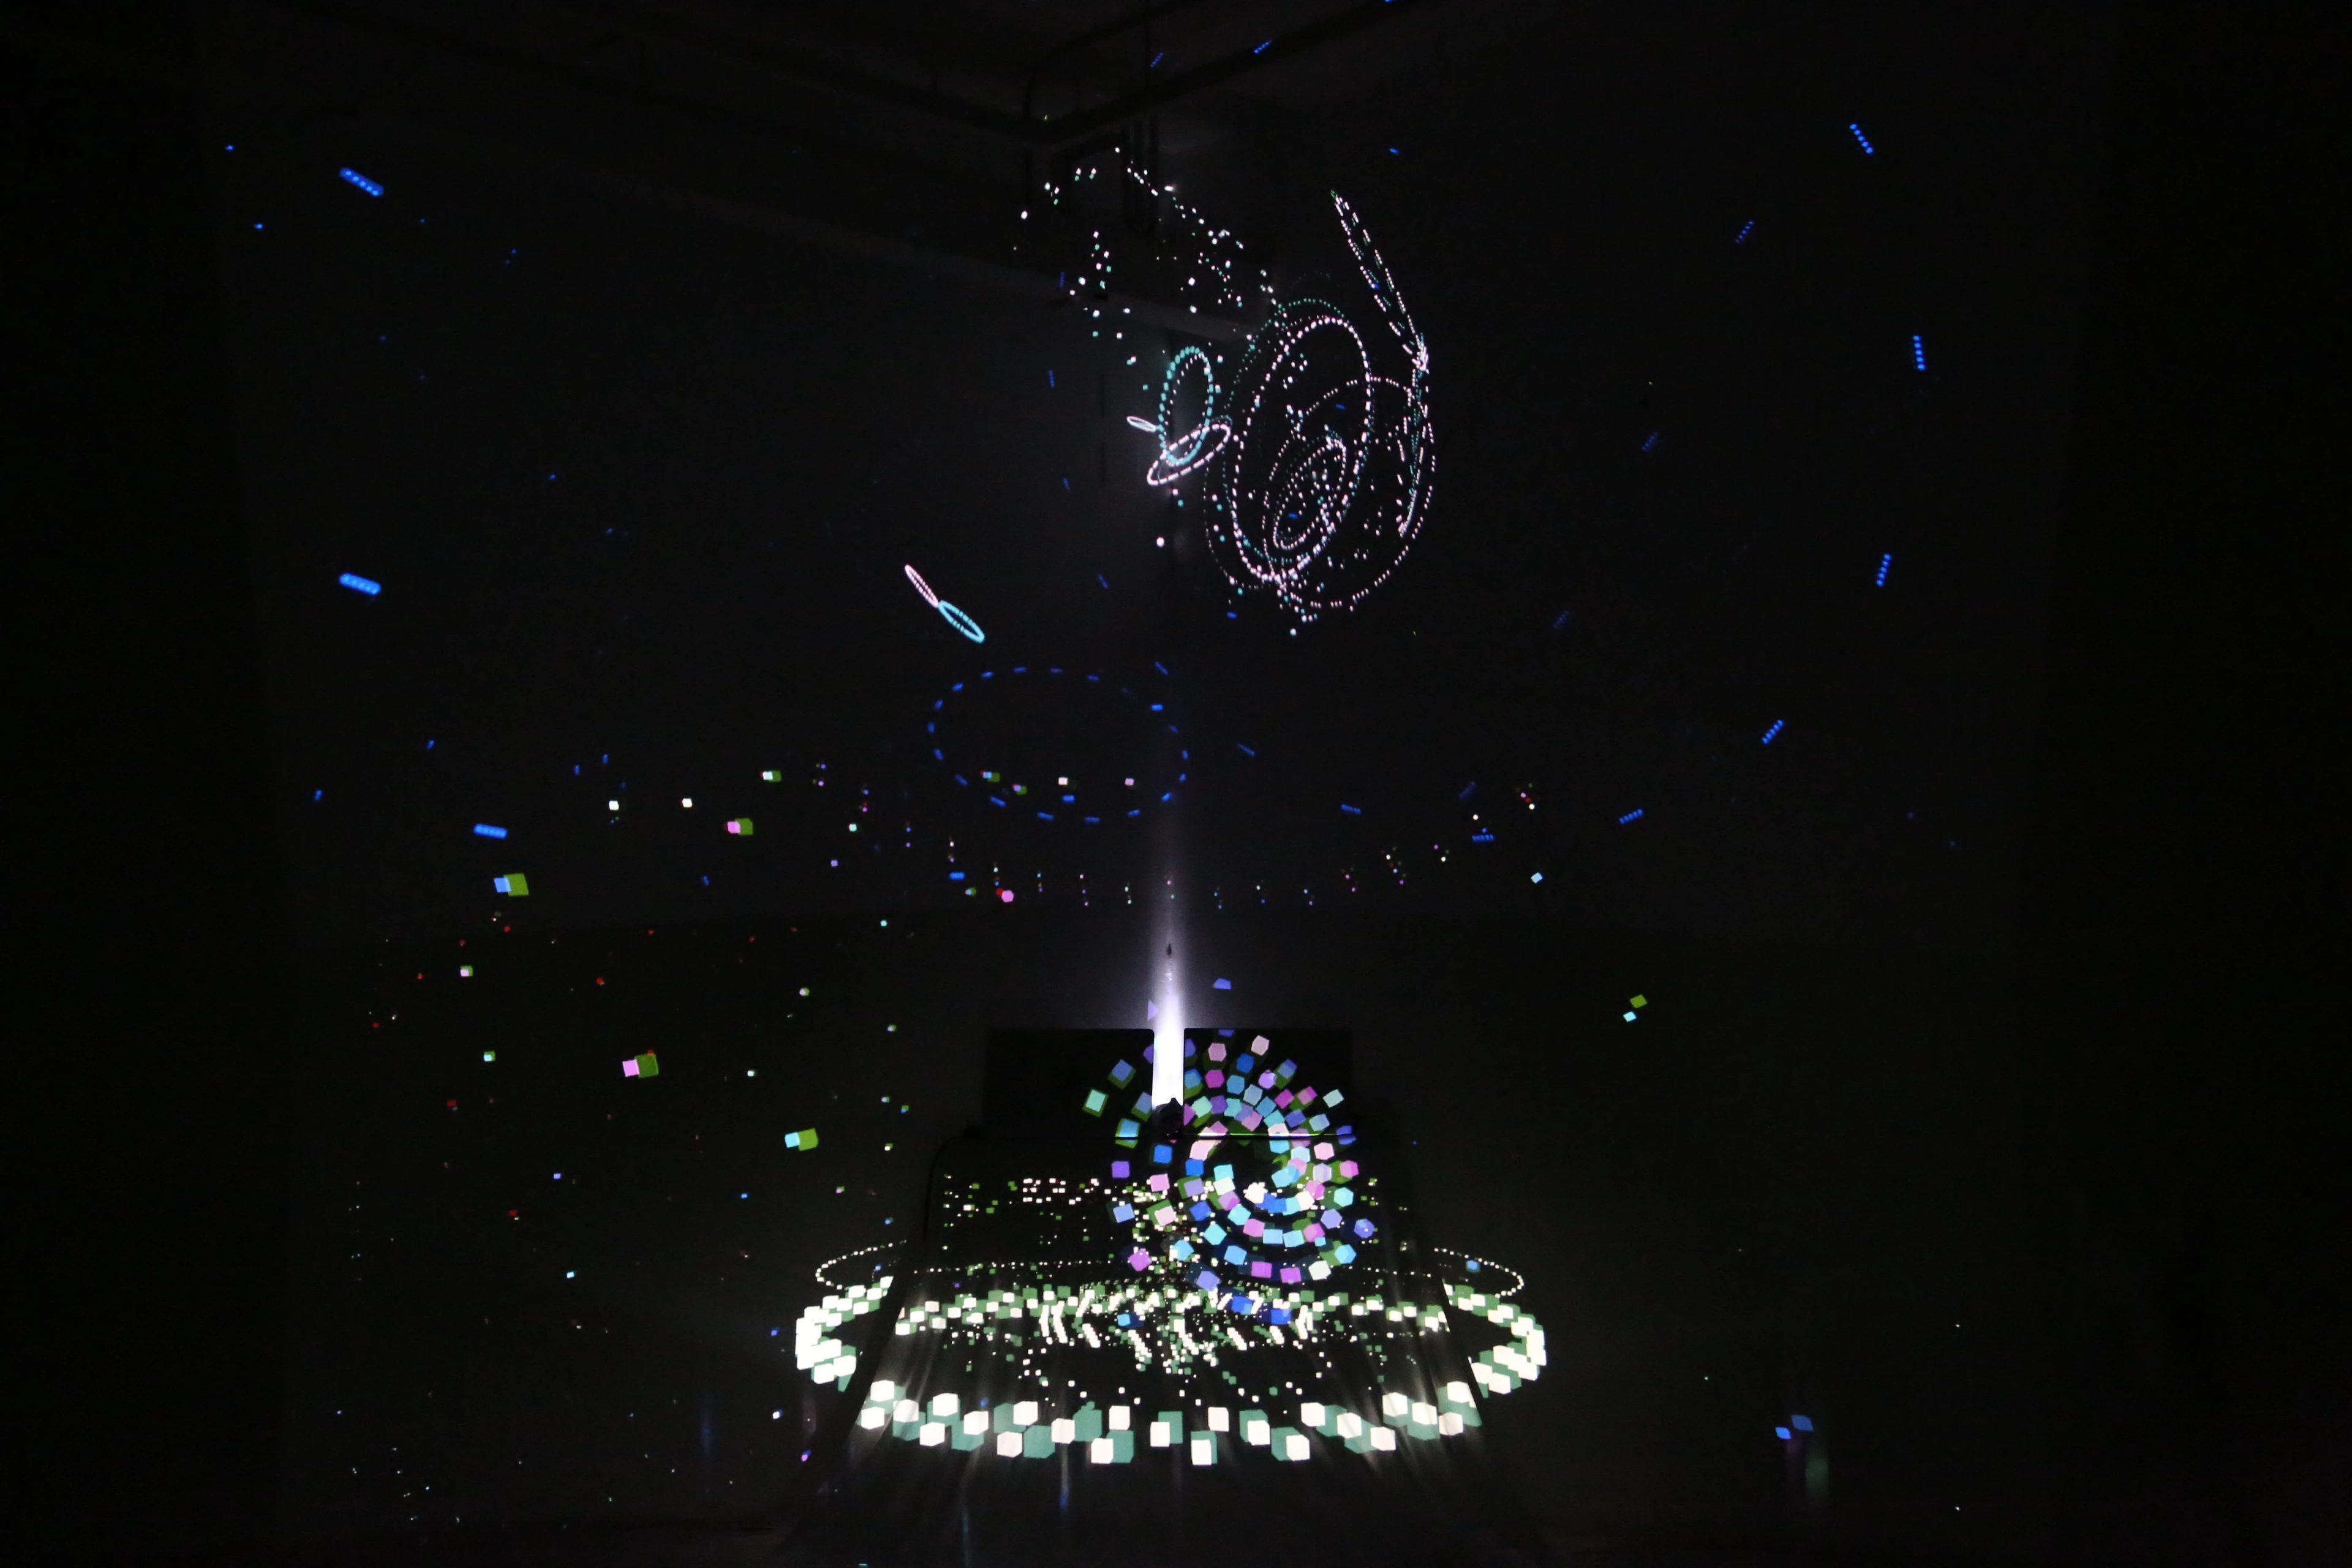 Solar System is an audio-visual live performance that marries data visualization and sonification.